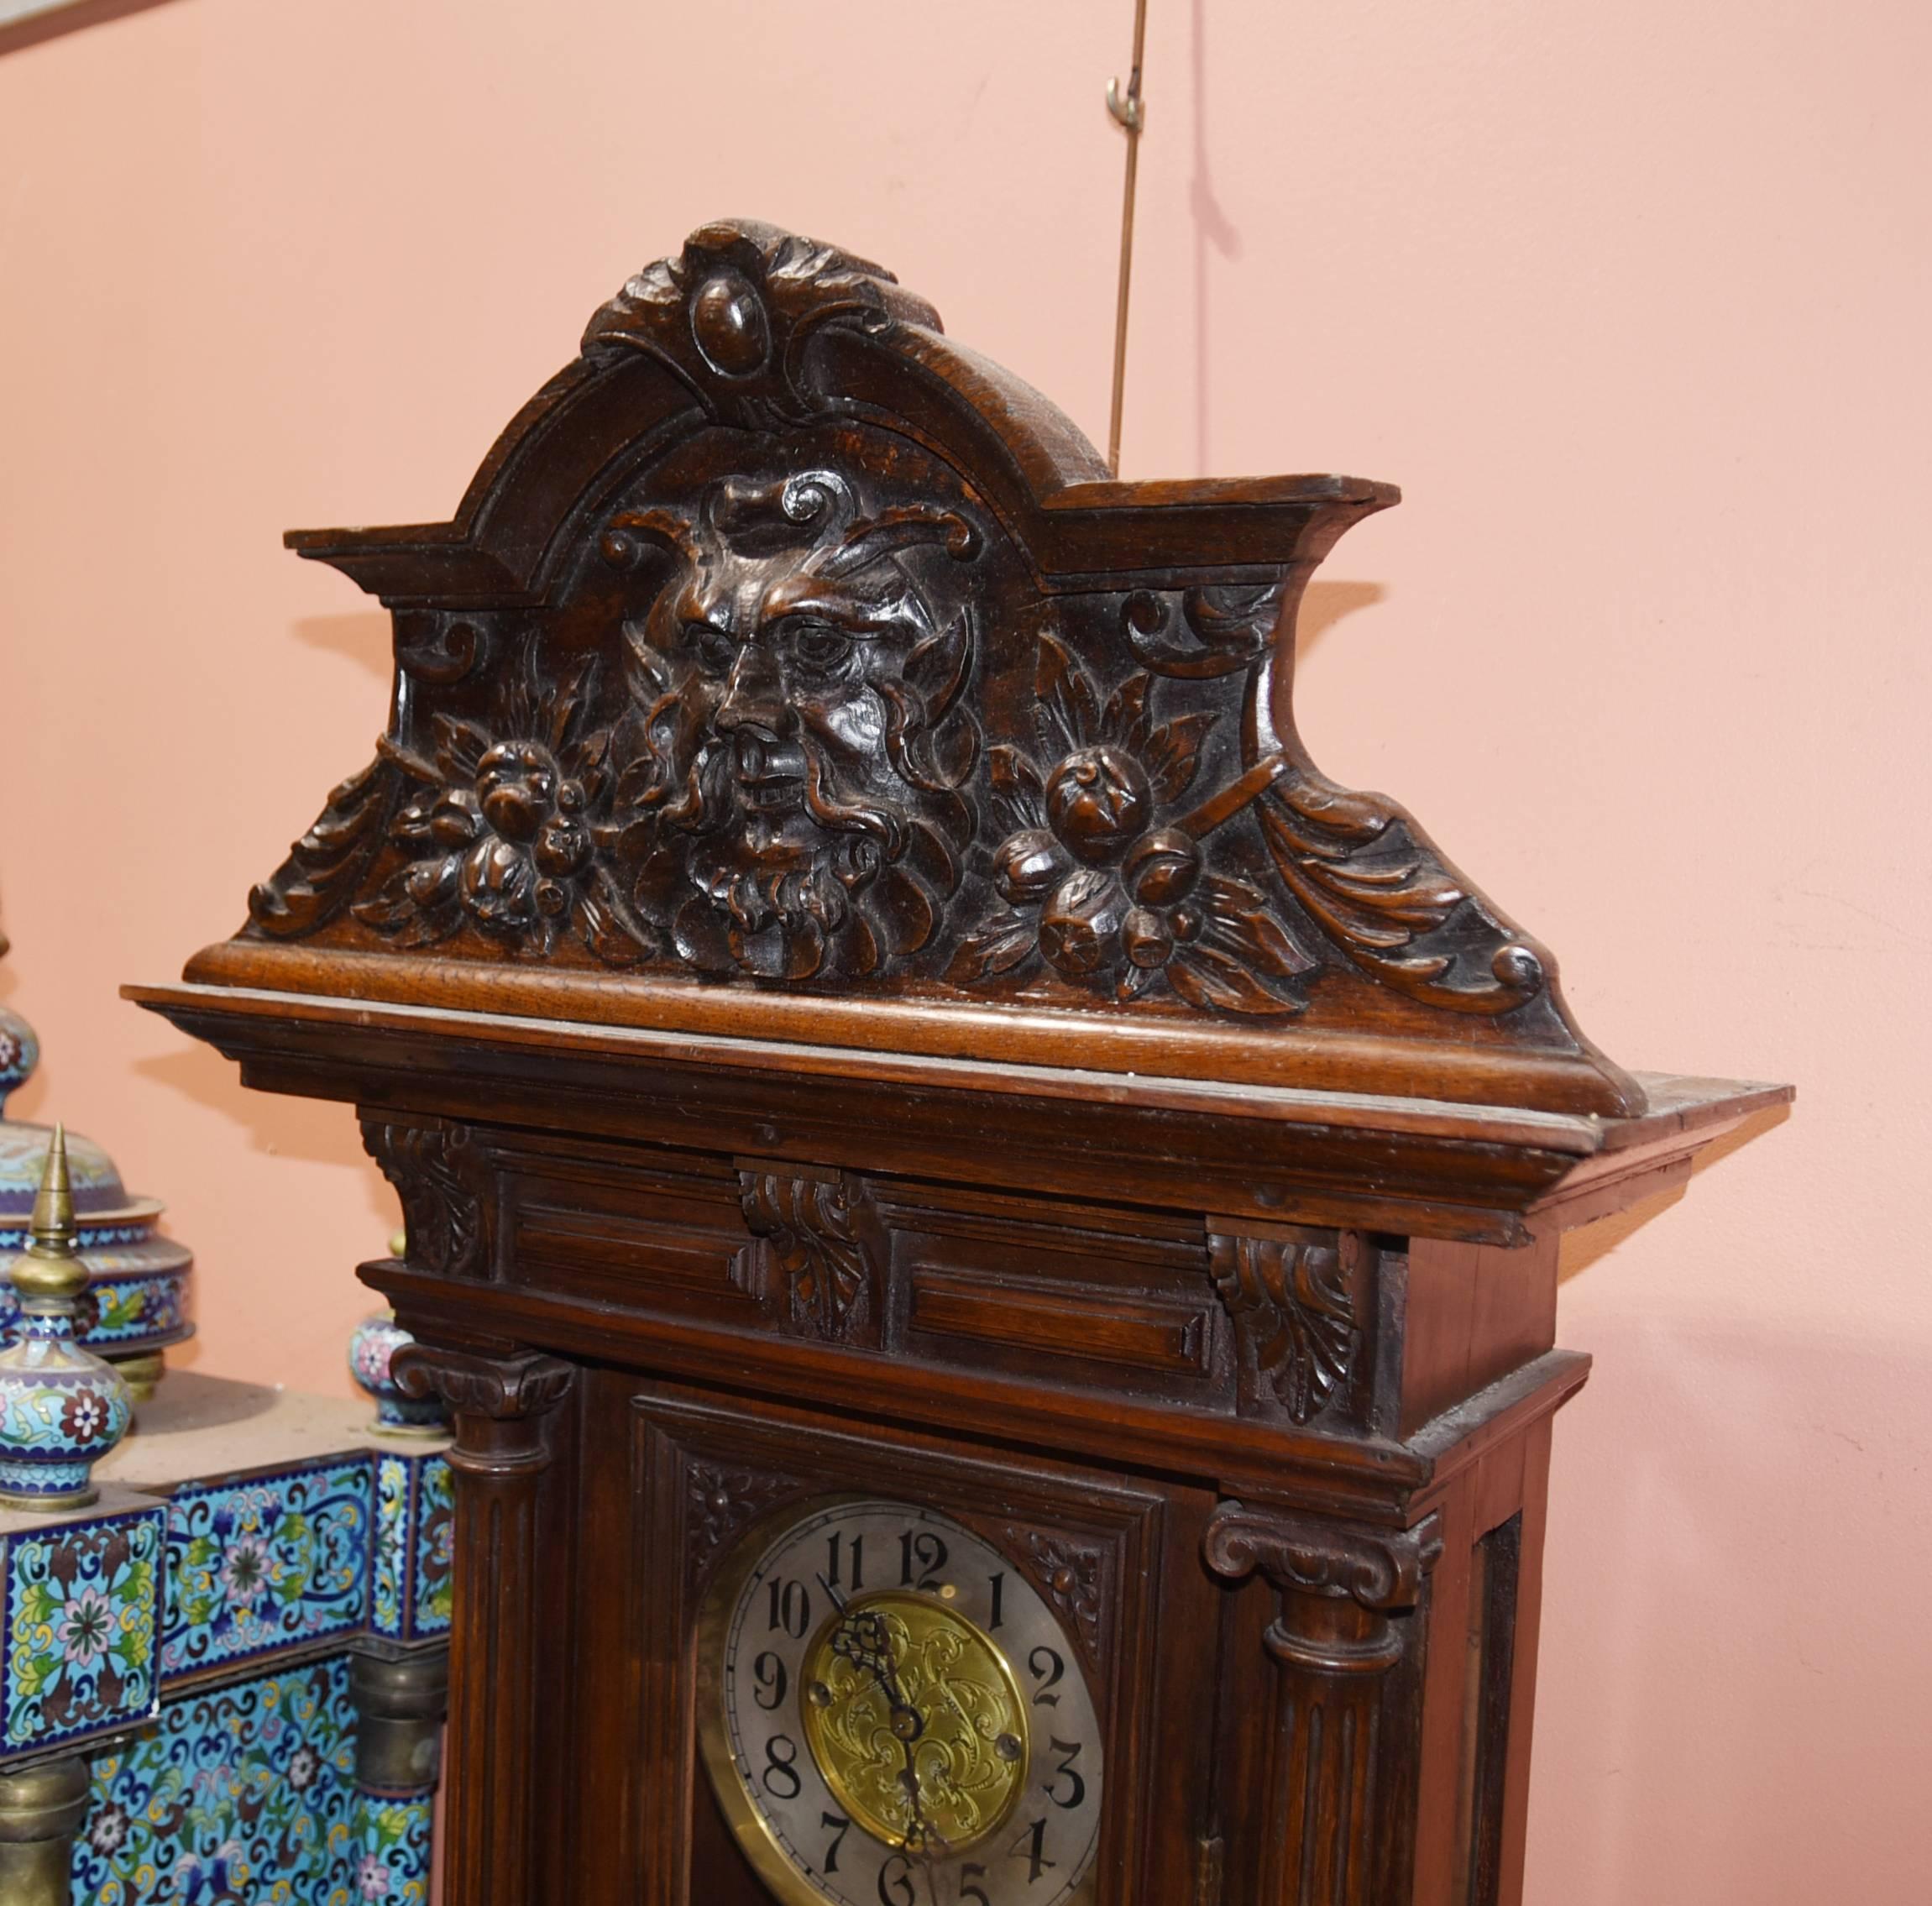 Gorgeous Vienna wall clock in mahogany with amazing hand-carved details.
Lovely regulator clock with hand chased weights and pendulum.
We date this amazing collectors piece to circa 1880.
Please let us know if you would like to view this piece in